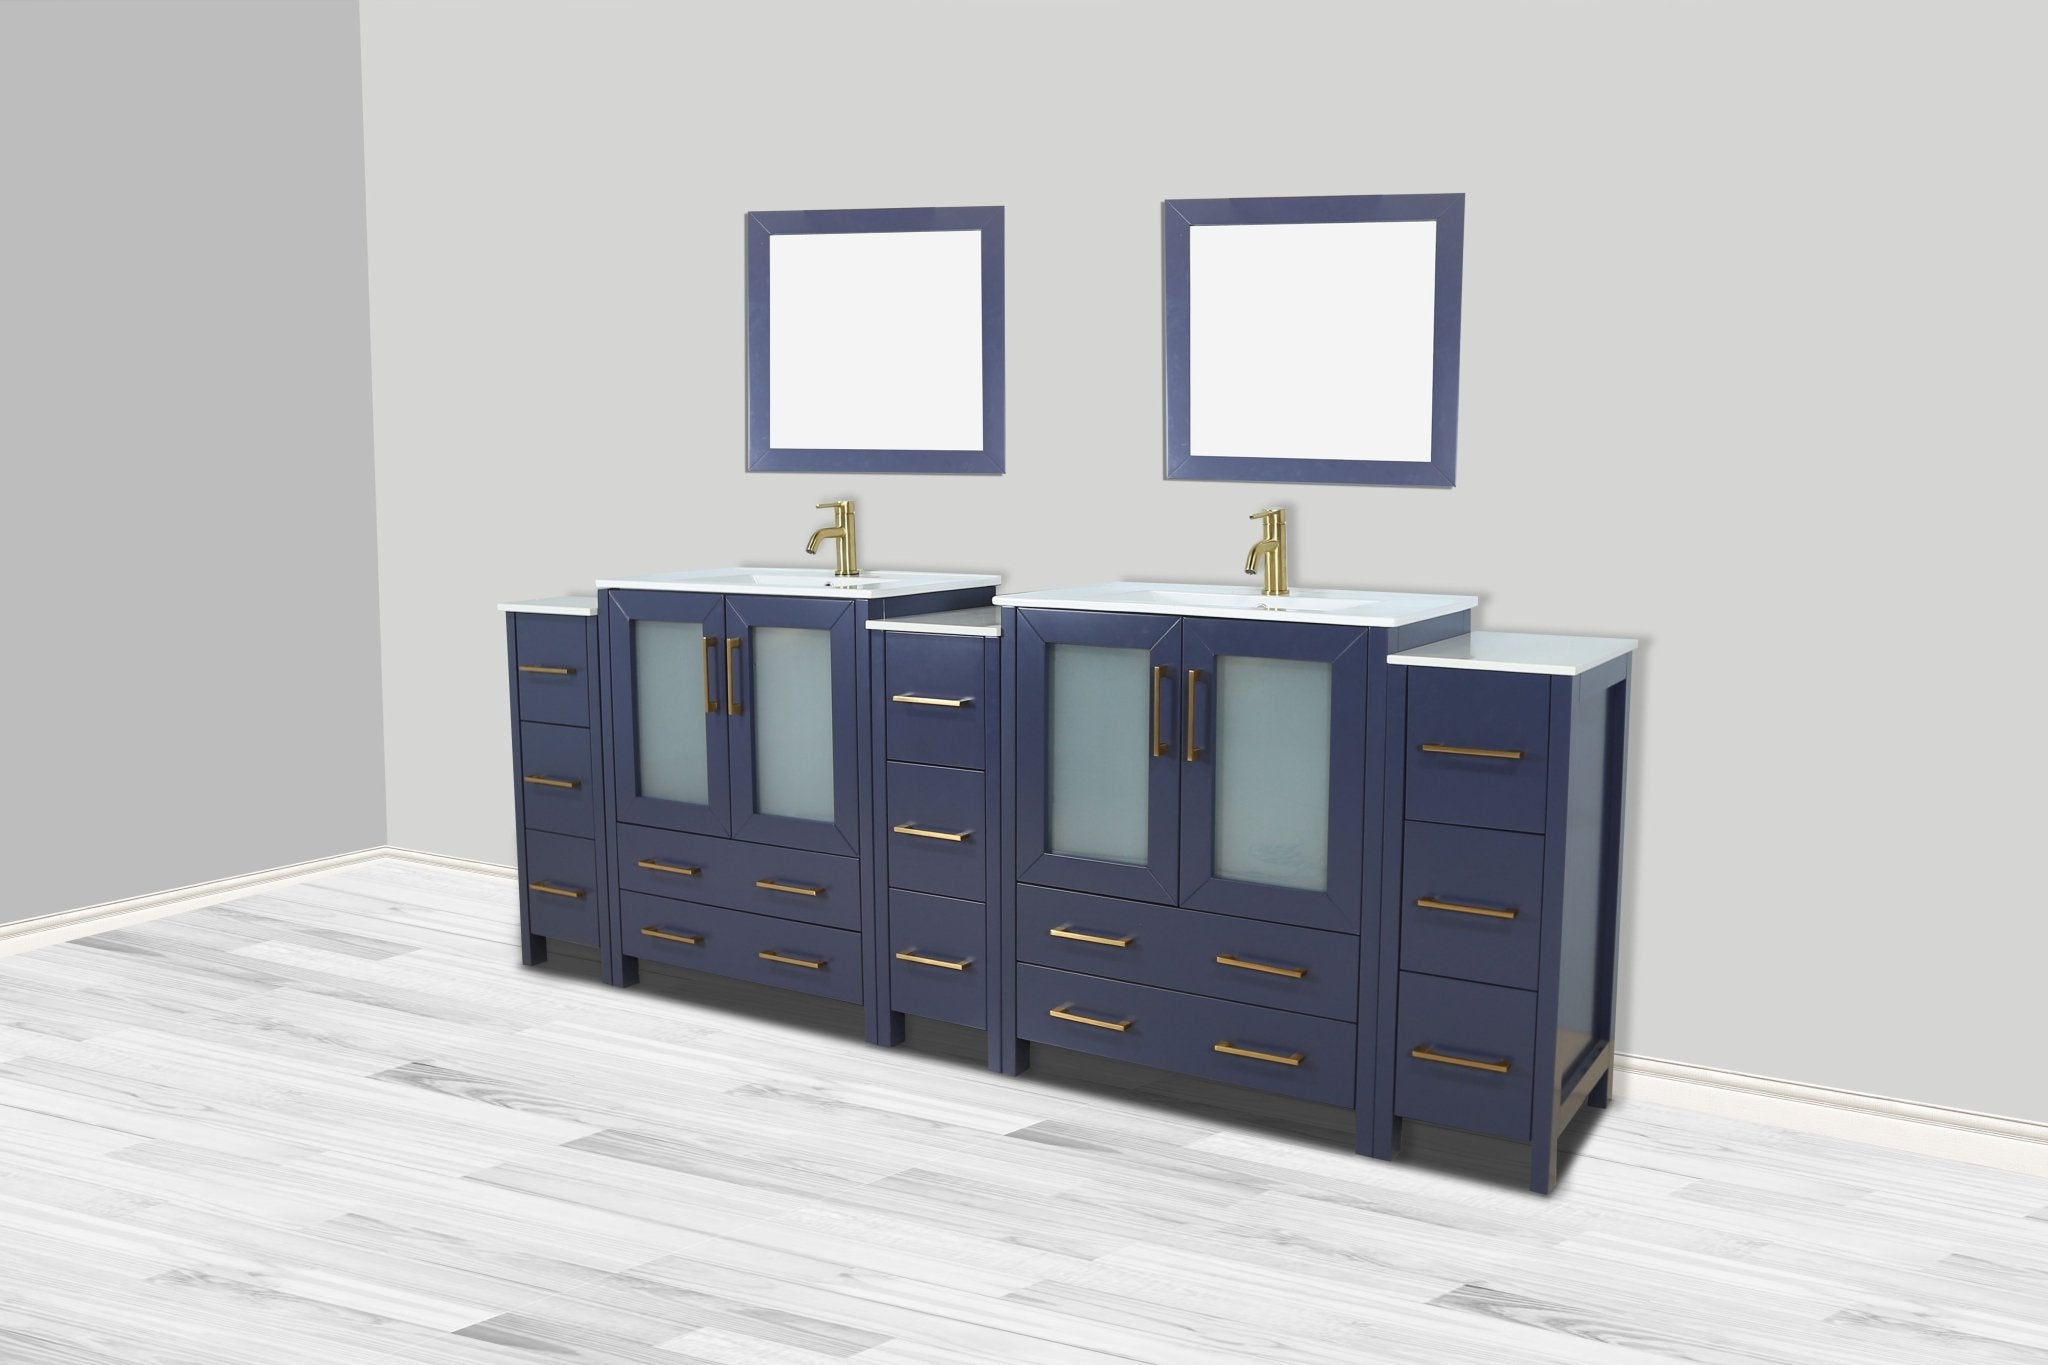 Vanity Art - London 96" Double Sink Bathroom Vanity Set with Sink and Mirrors - 3 Side Cabinets - Bhdepot 